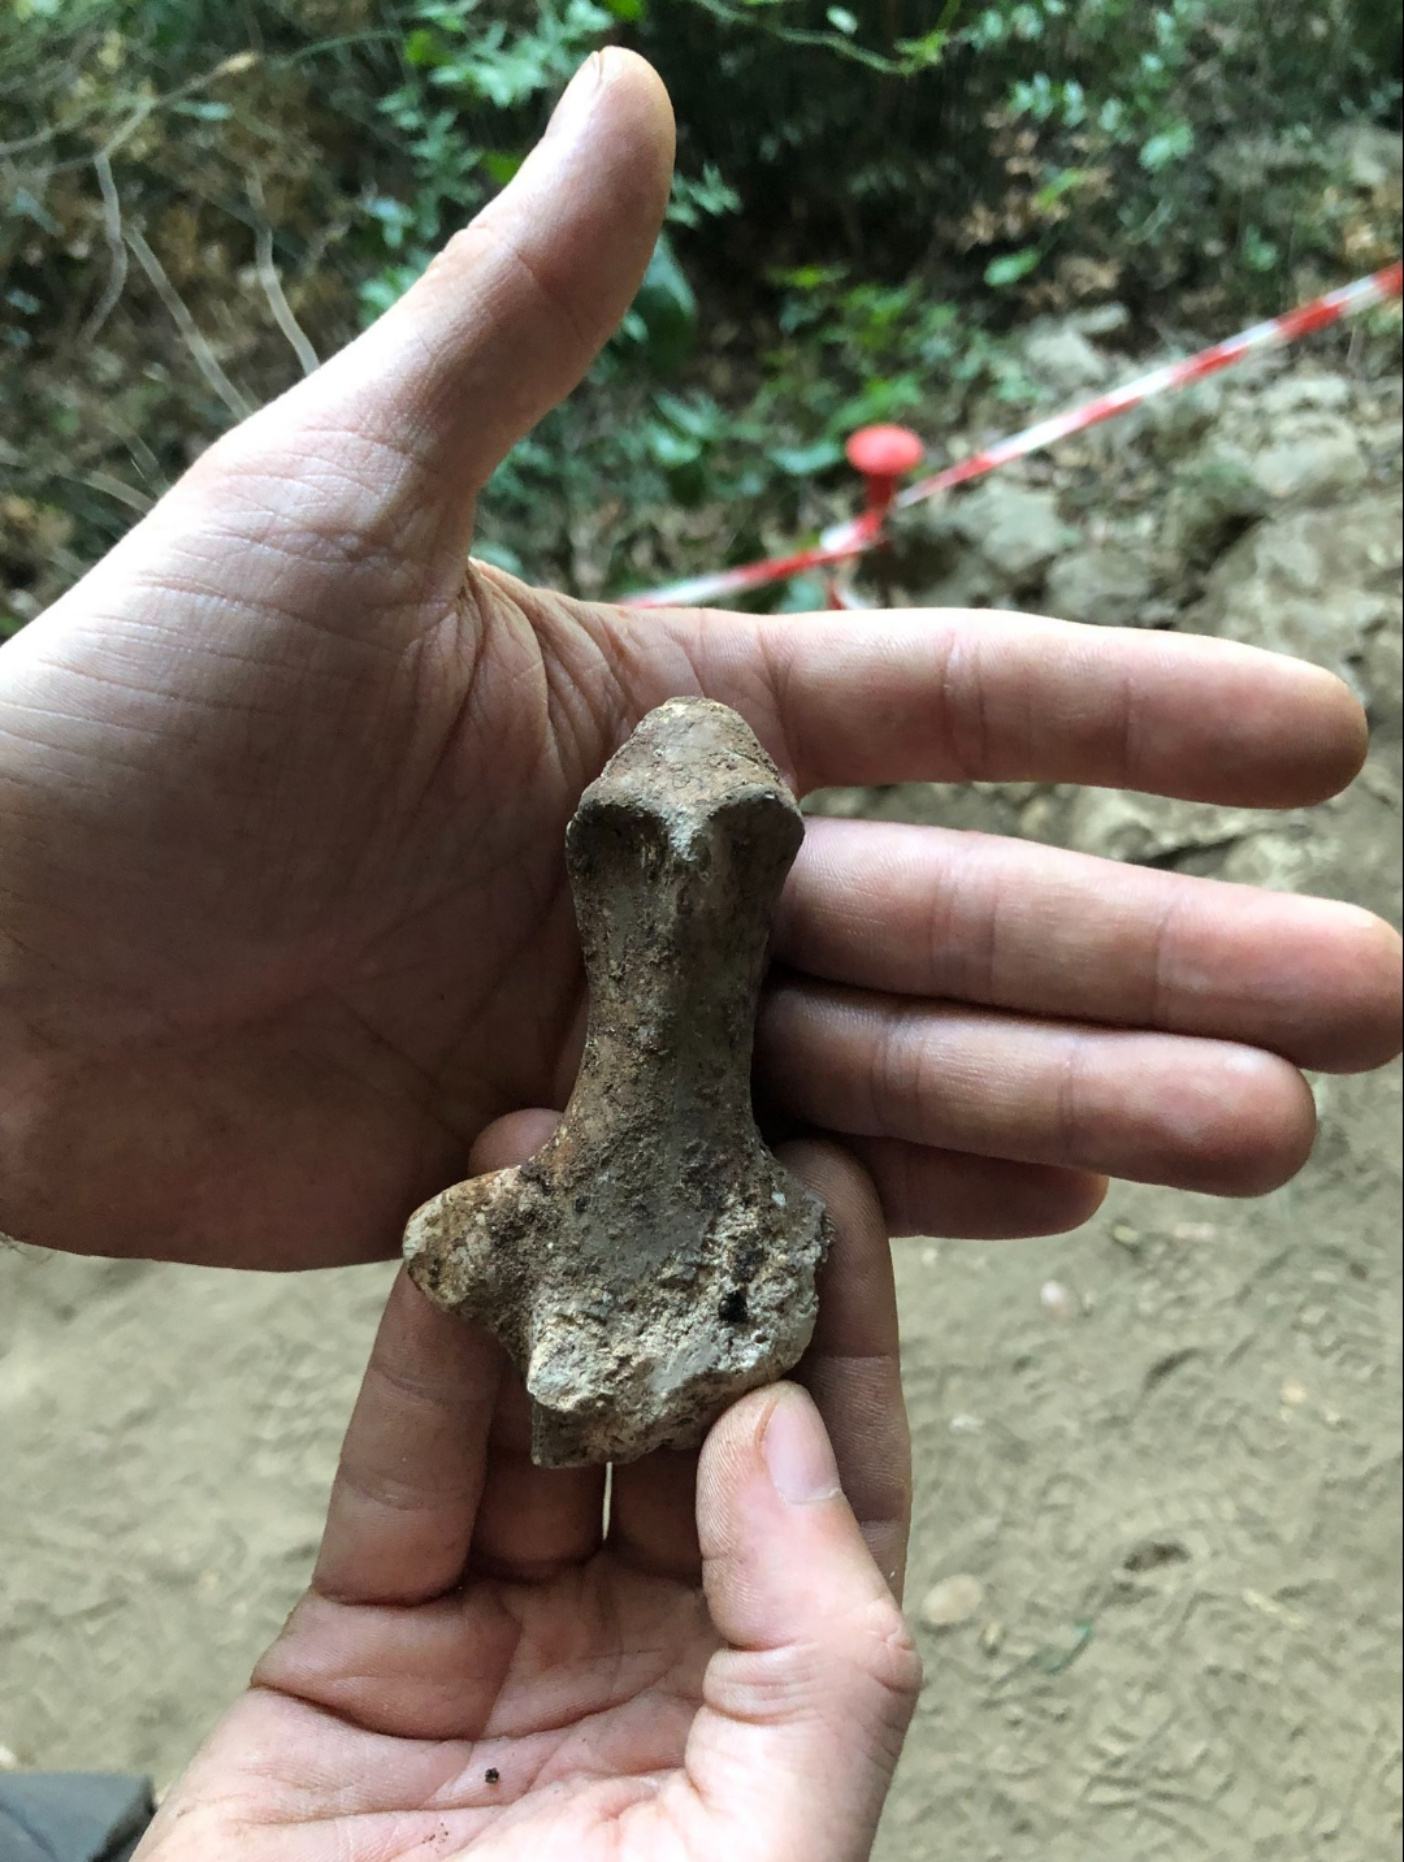 7,000-year-old ‘figurine’ found in Italy.